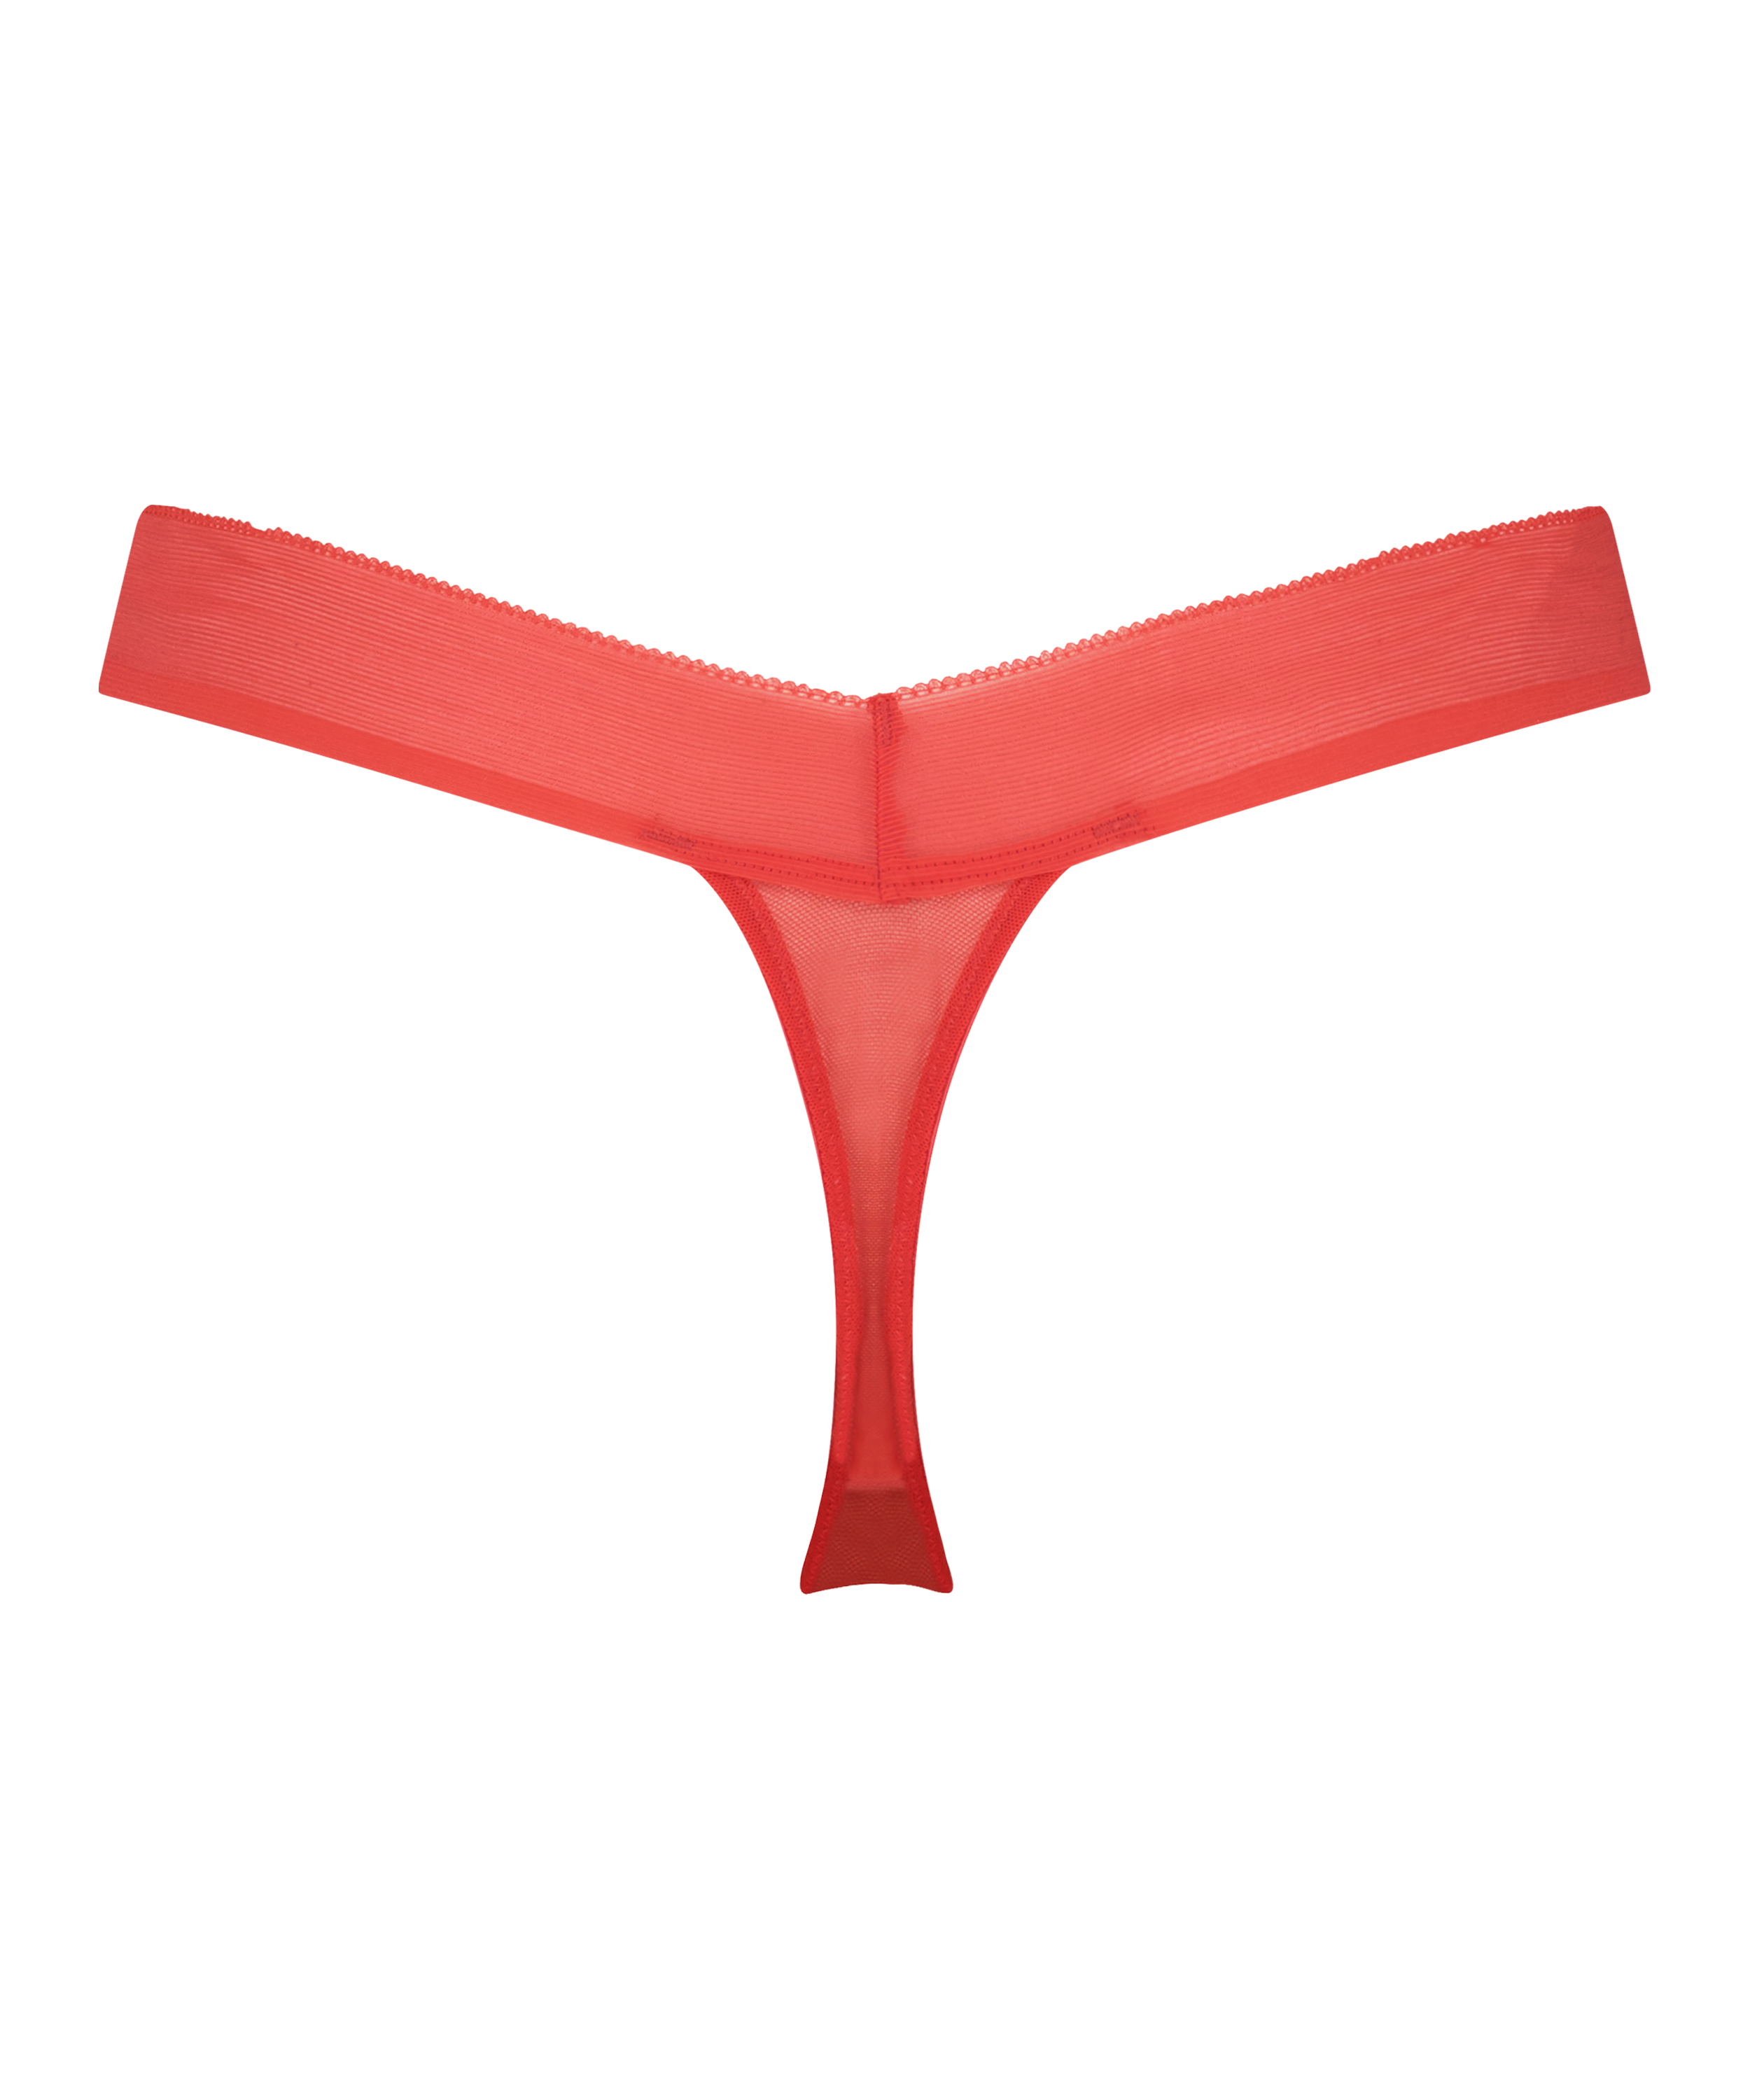 Chione thong, Red, main